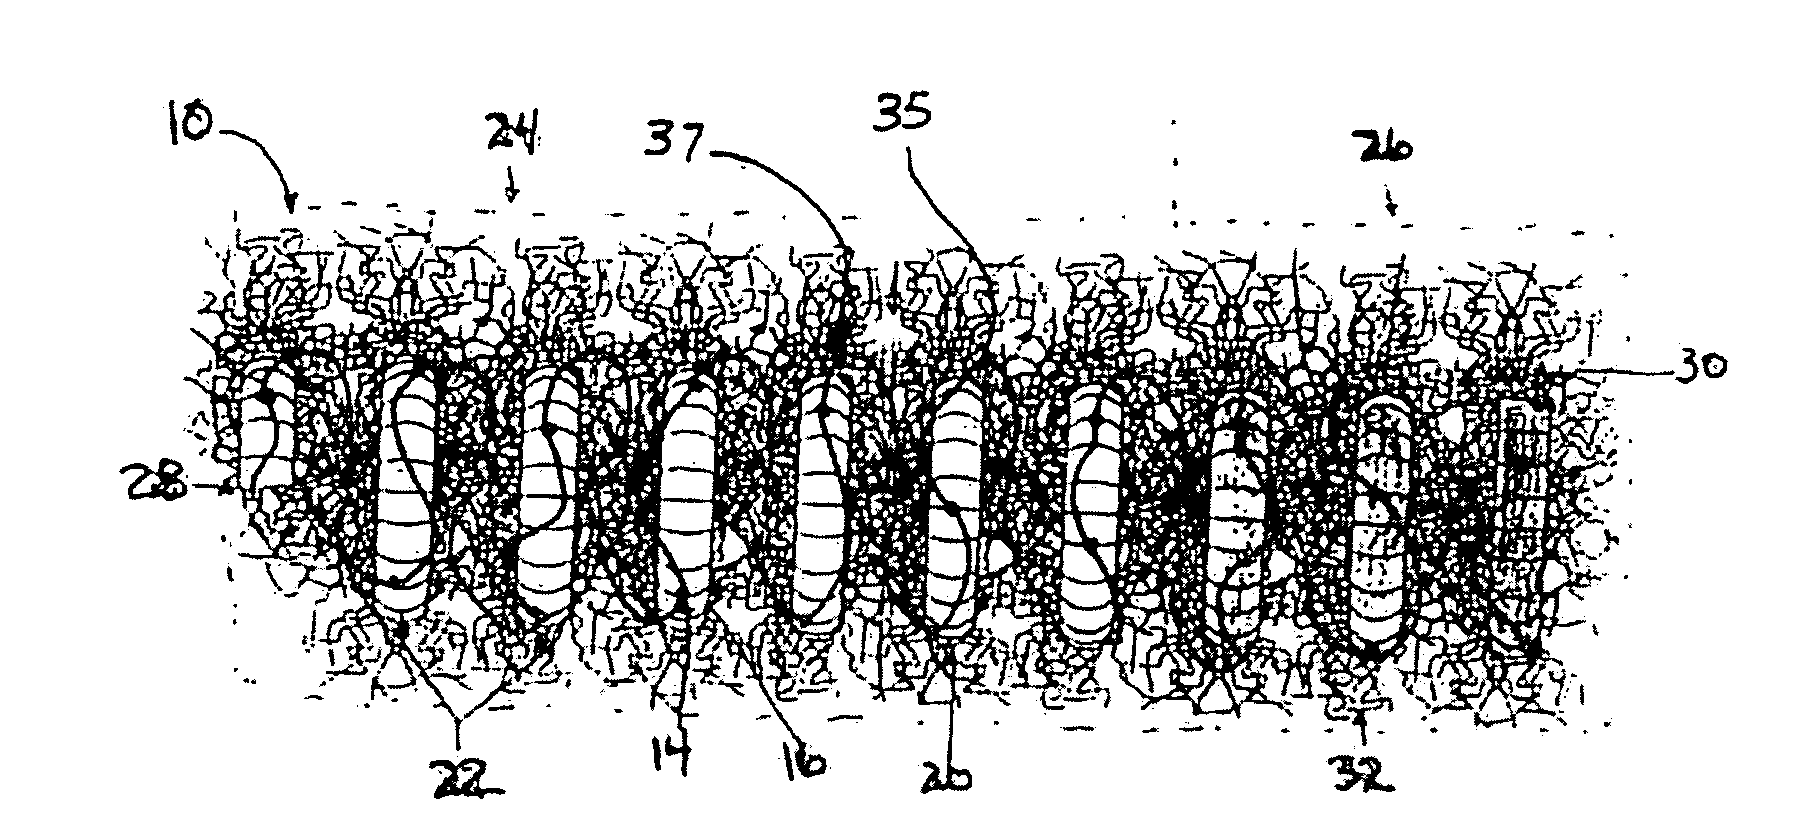 Spiral occluding device with an occlusion sail